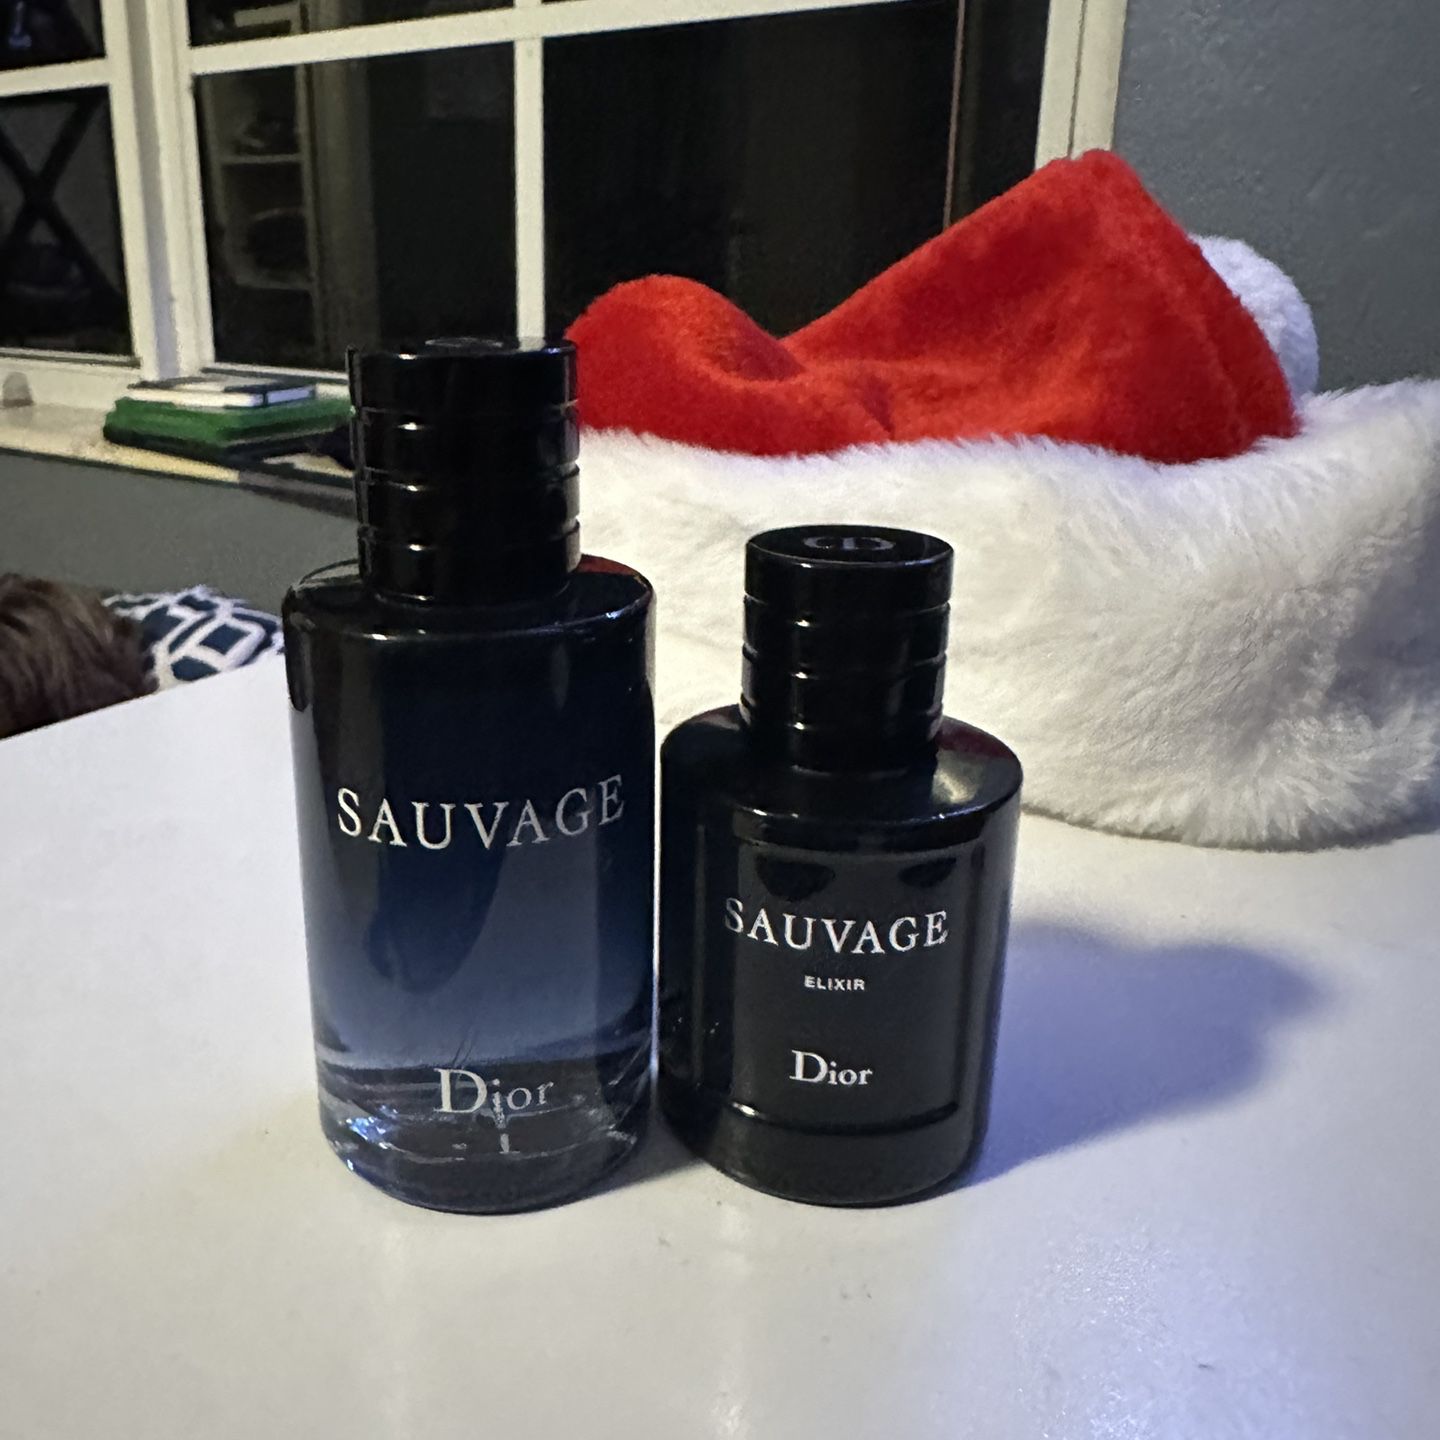 Dior sauvage (EDT) and Dior sauvage Elixir both or separate 